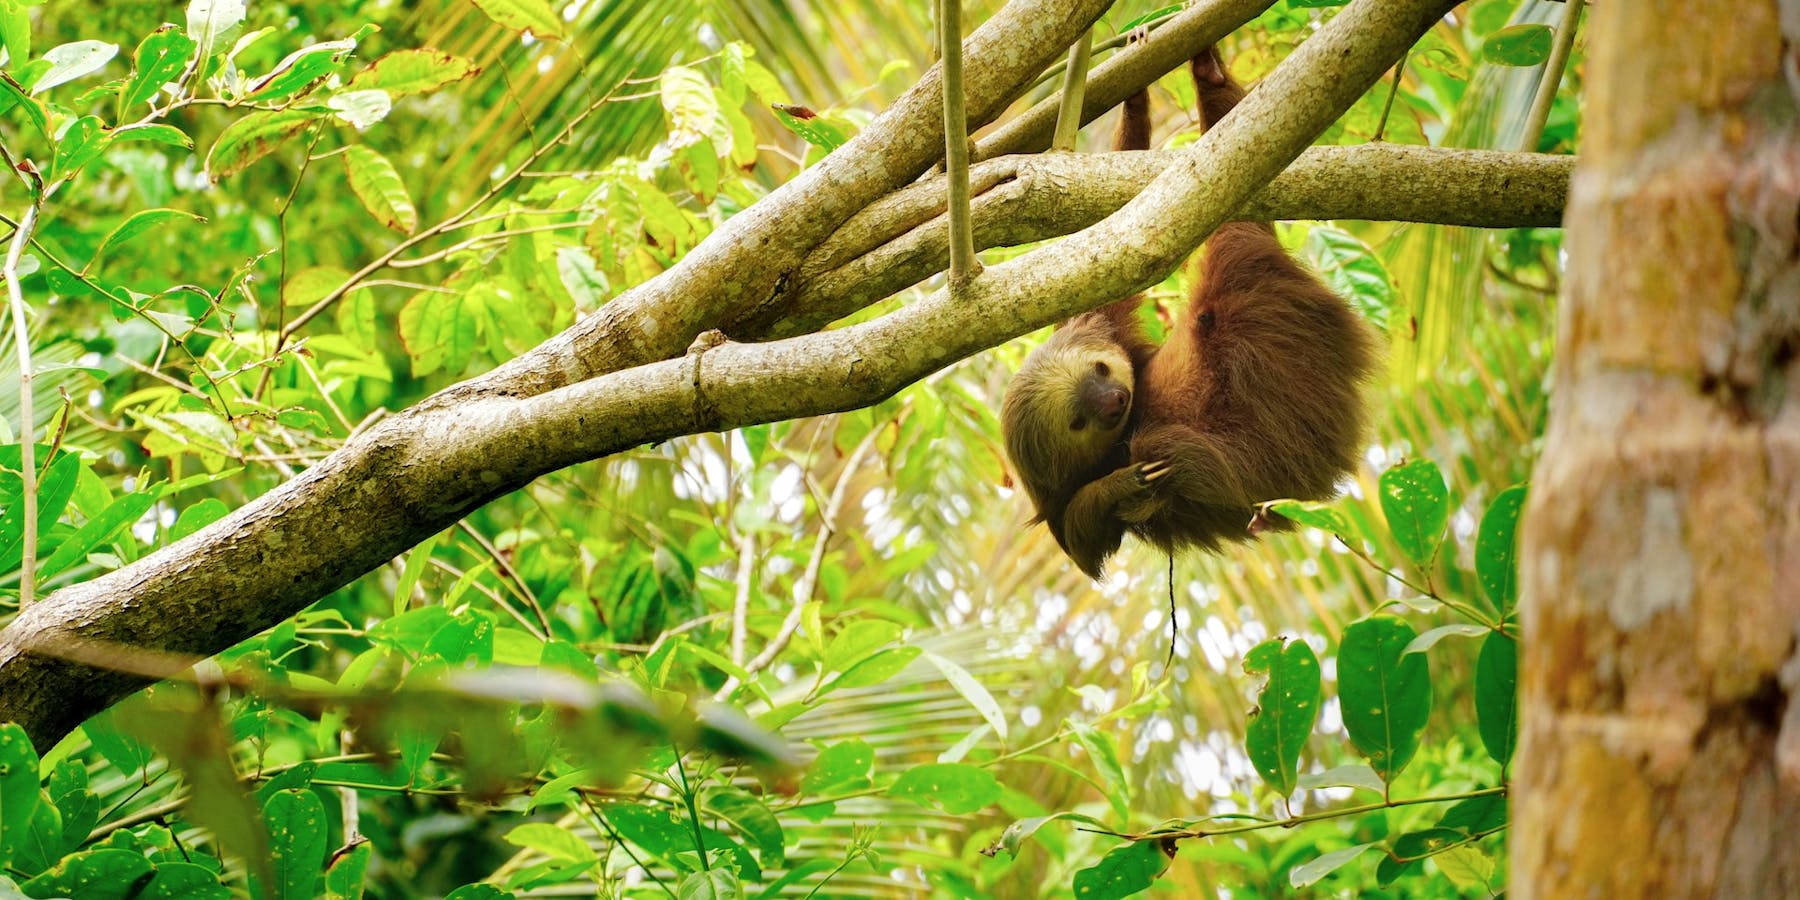 Sloth hanging from a tree branch in Costa Rica